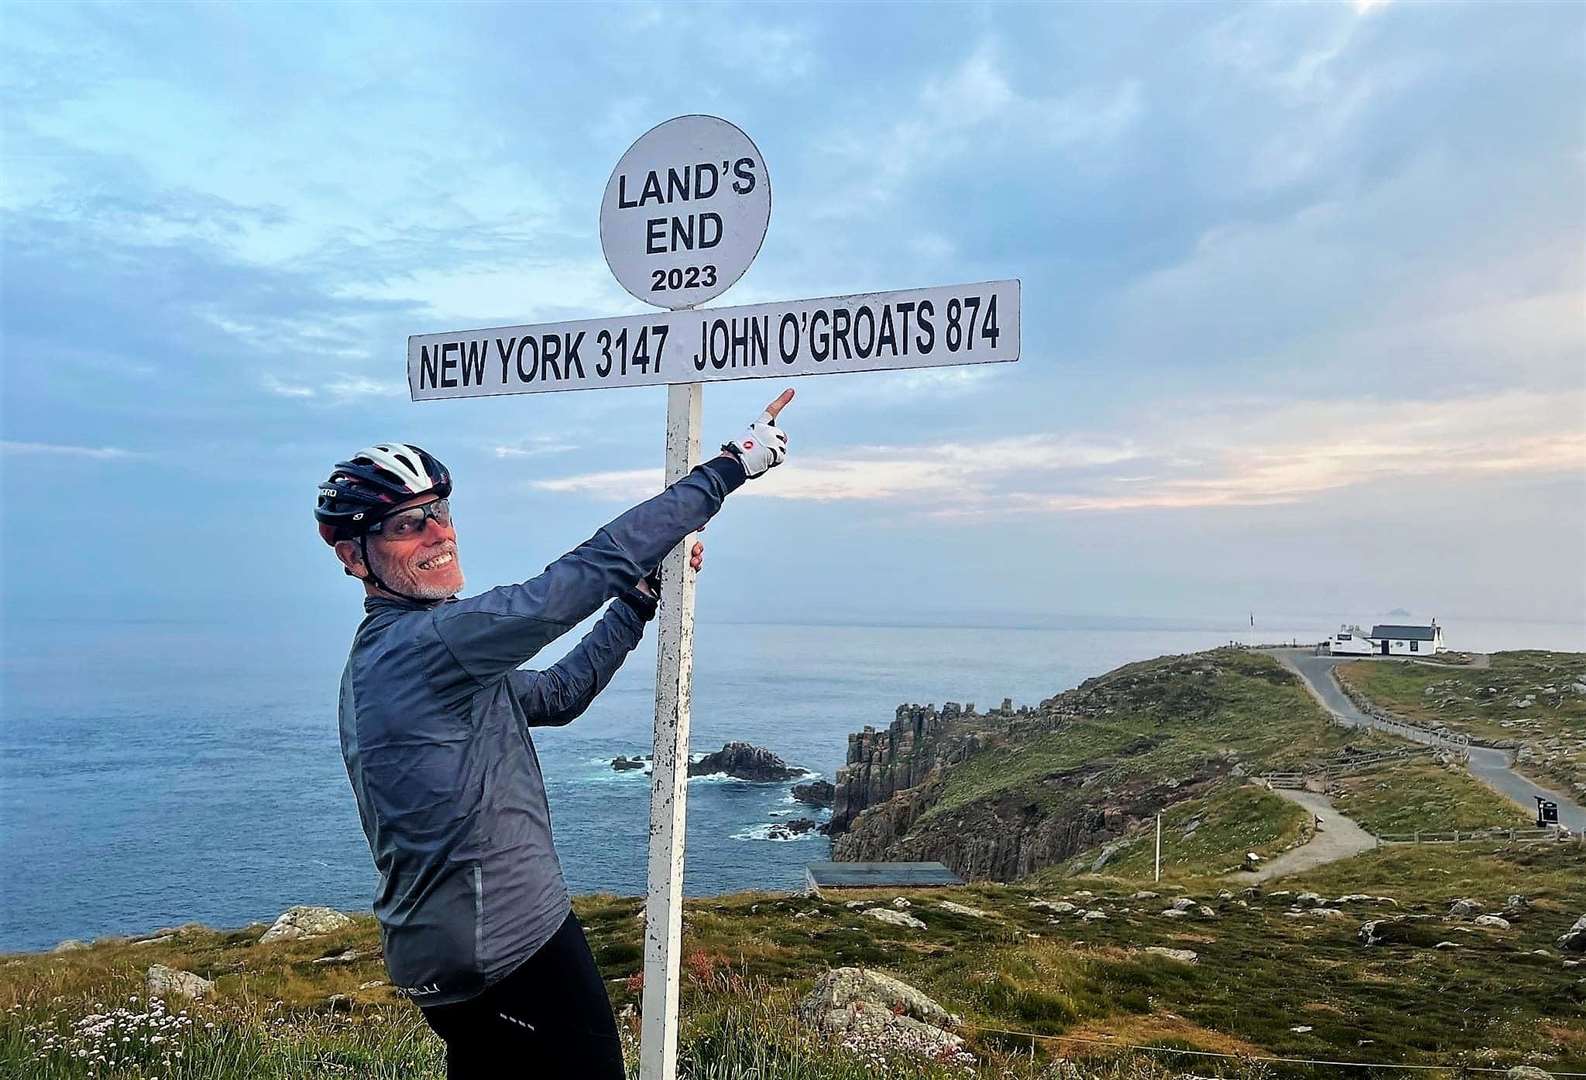 Tim Styles made it to Land's End after a Lejogle journey of 10.68 days.